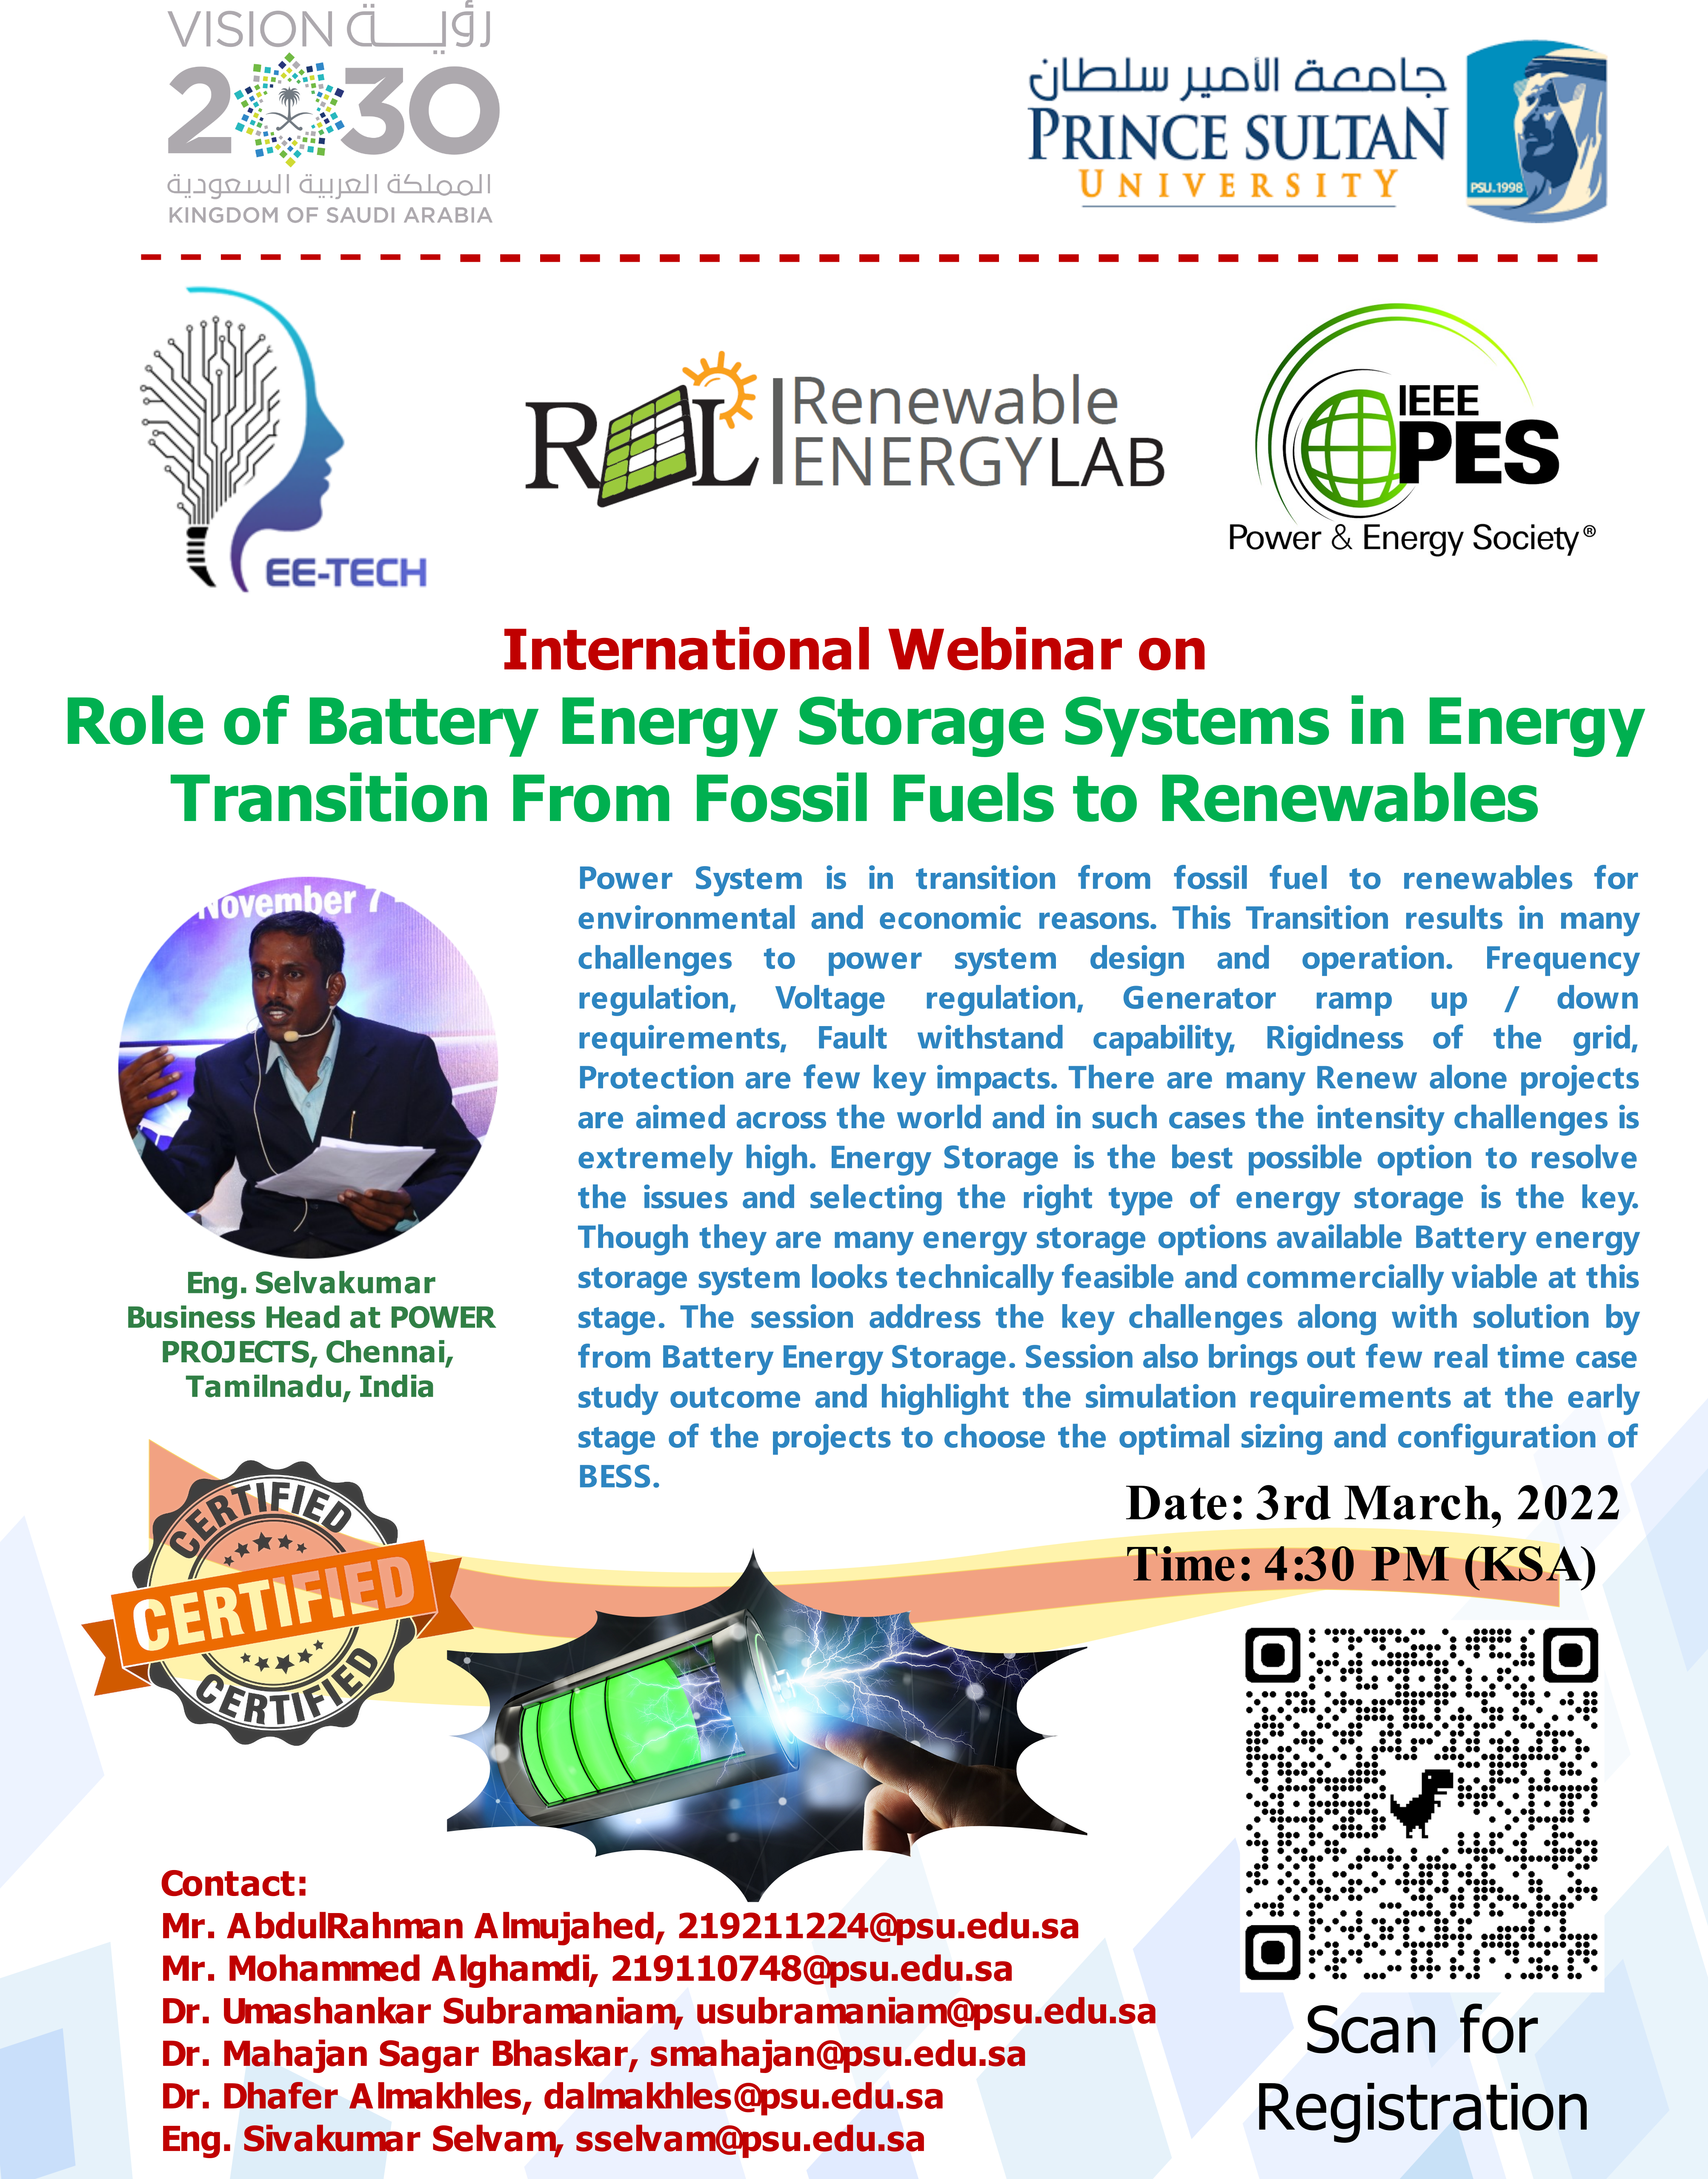 International Webinar on Role of Battery Energy Storage Systems in Energy Transition From Fossil Fuels to Renewables